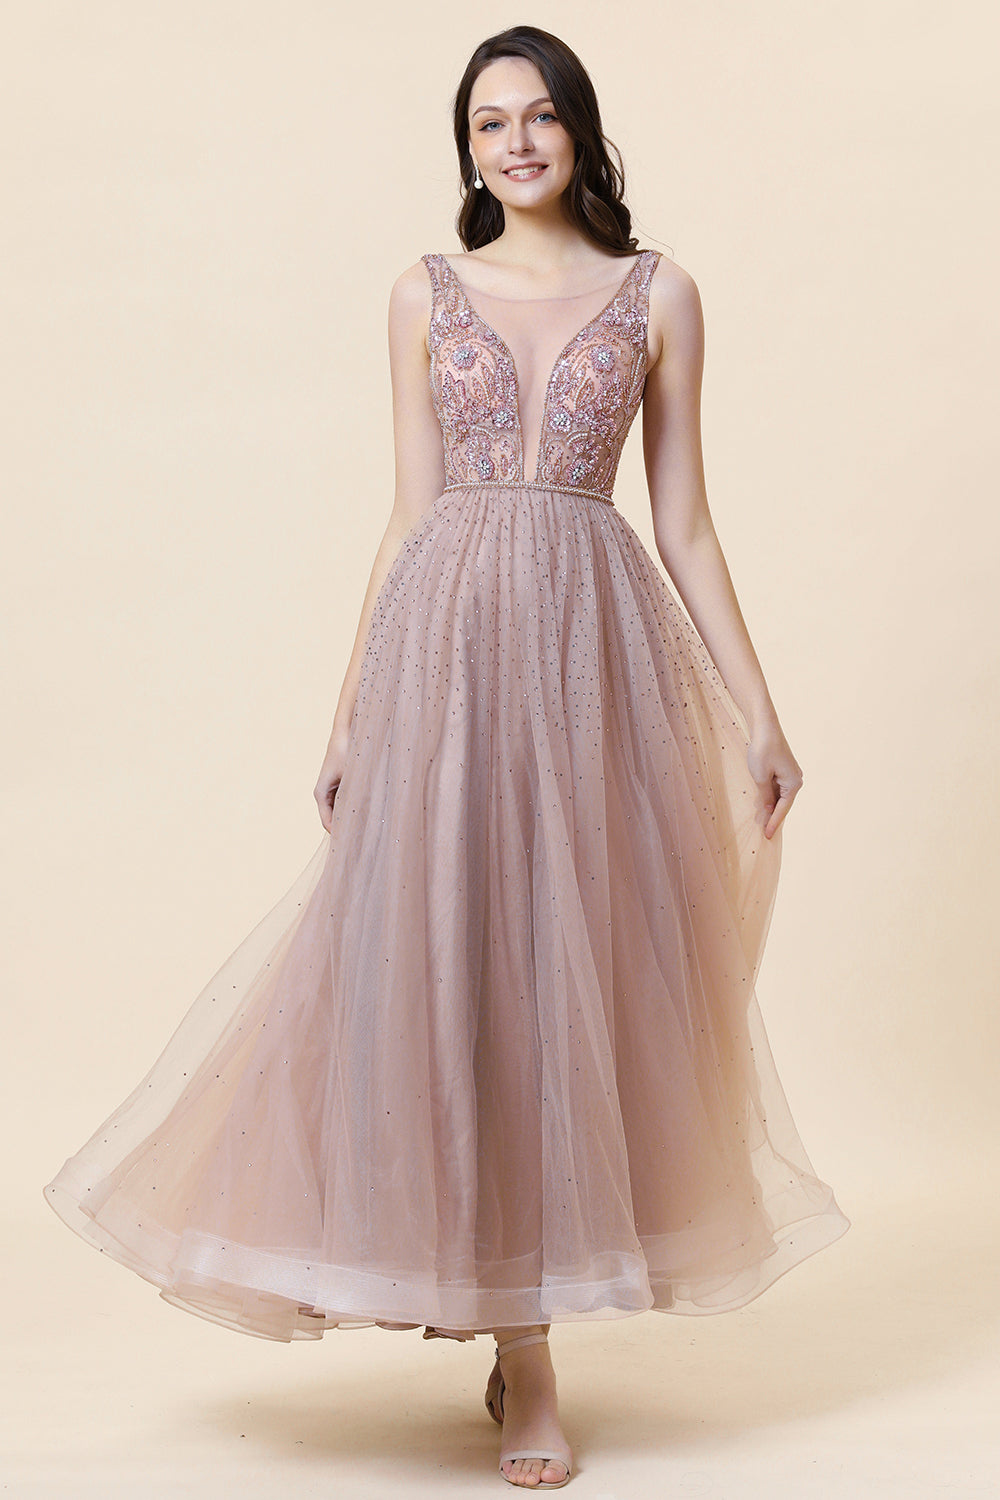 Sparkly Blush Beaded Long Tulle Prom Dress